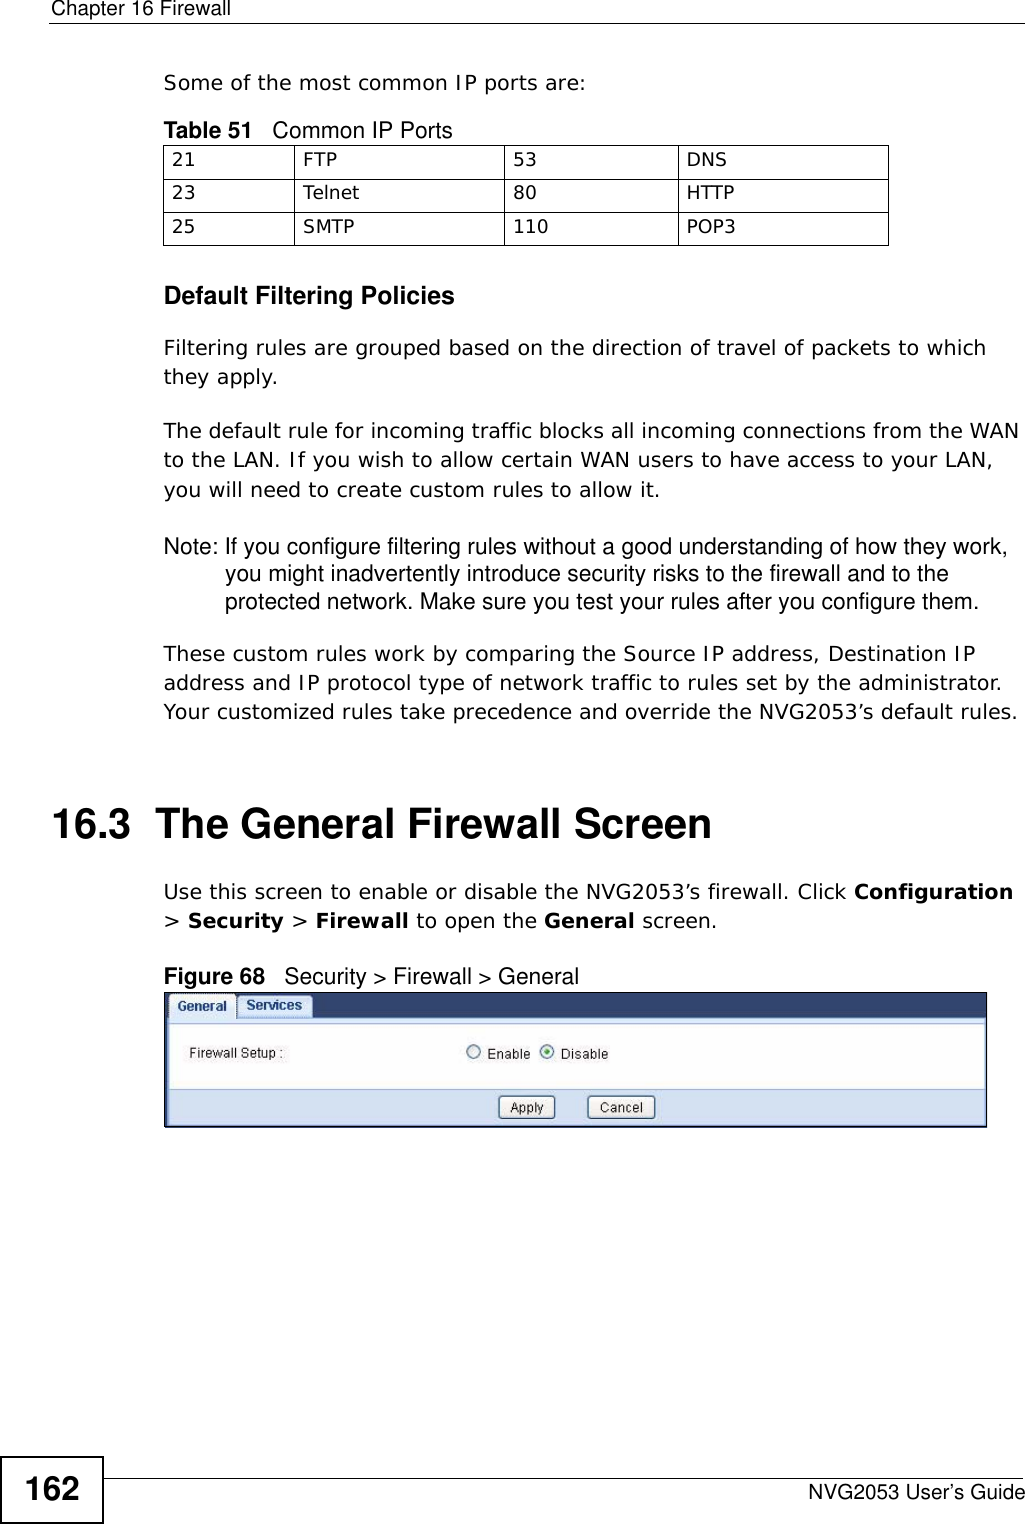 Chapter 16 FirewallNVG2053 User’s Guide162Some of the most common IP ports are: Default Filtering Policies Filtering rules are grouped based on the direction of travel of packets to which they apply. The default rule for incoming traffic blocks all incoming connections from the WAN to the LAN. If you wish to allow certain WAN users to have access to your LAN, you will need to create custom rules to allow it.Note: If you configure filtering rules without a good understanding of how they work, you might inadvertently introduce security risks to the firewall and to the protected network. Make sure you test your rules after you configure them.These custom rules work by comparing the Source IP address, Destination IP address and IP protocol type of network traffic to rules set by the administrator. Your customized rules take precedence and override the NVG2053’s default rules. 16.3  The General Firewall Screen   Use this screen to enable or disable the NVG2053’s firewall. Click Configuration &gt; Security &gt; Firewall to open the General screen.Figure 68   Security &gt; Firewall &gt; General Table 51   Common IP Ports21 FTP 53 DNS23 Telnet 80 HTTP25 SMTP 110 POP3